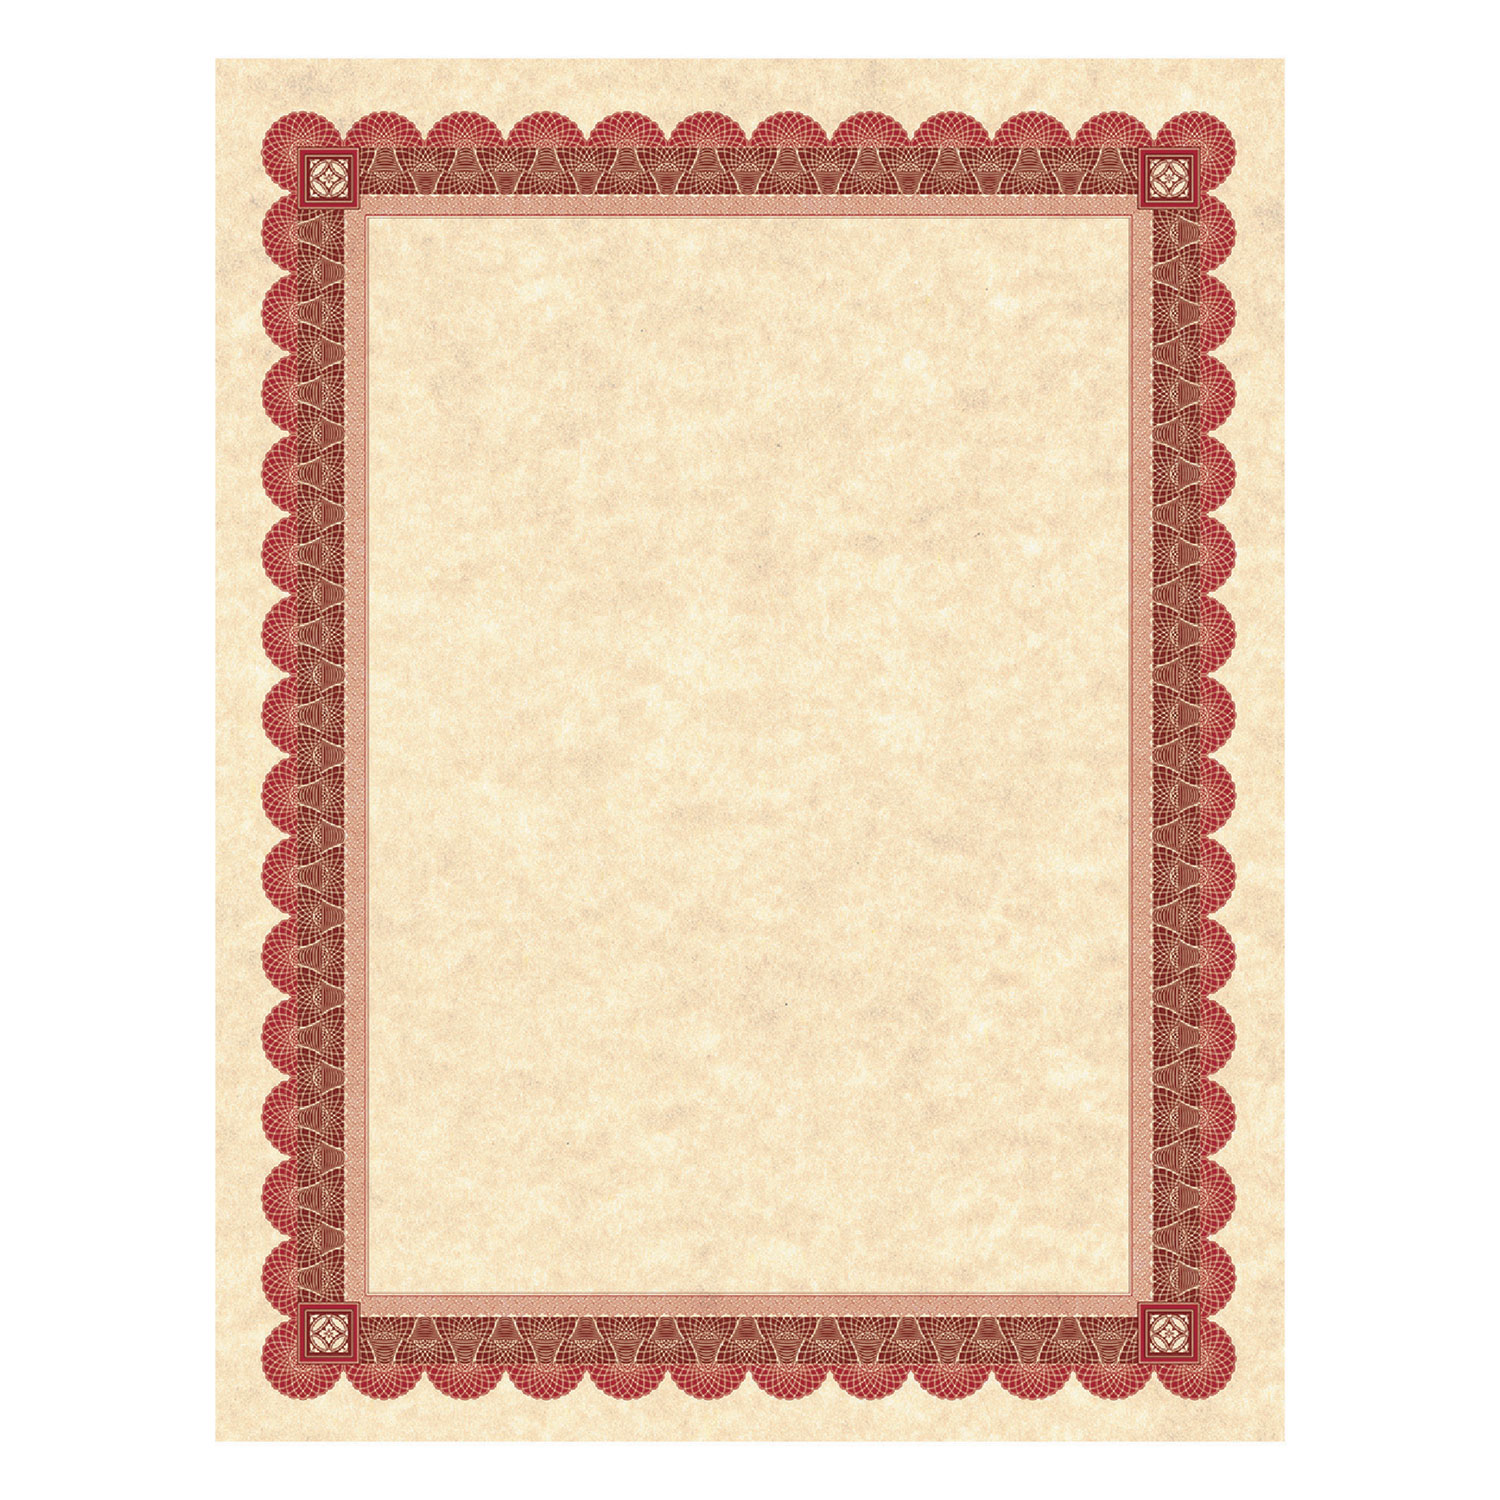  Southworth CT5R Parchment Certificates, Academic, Copper w/ Red & Brown Border, 8 1/2 x 11, 25/Pack (SOUCT5R) 